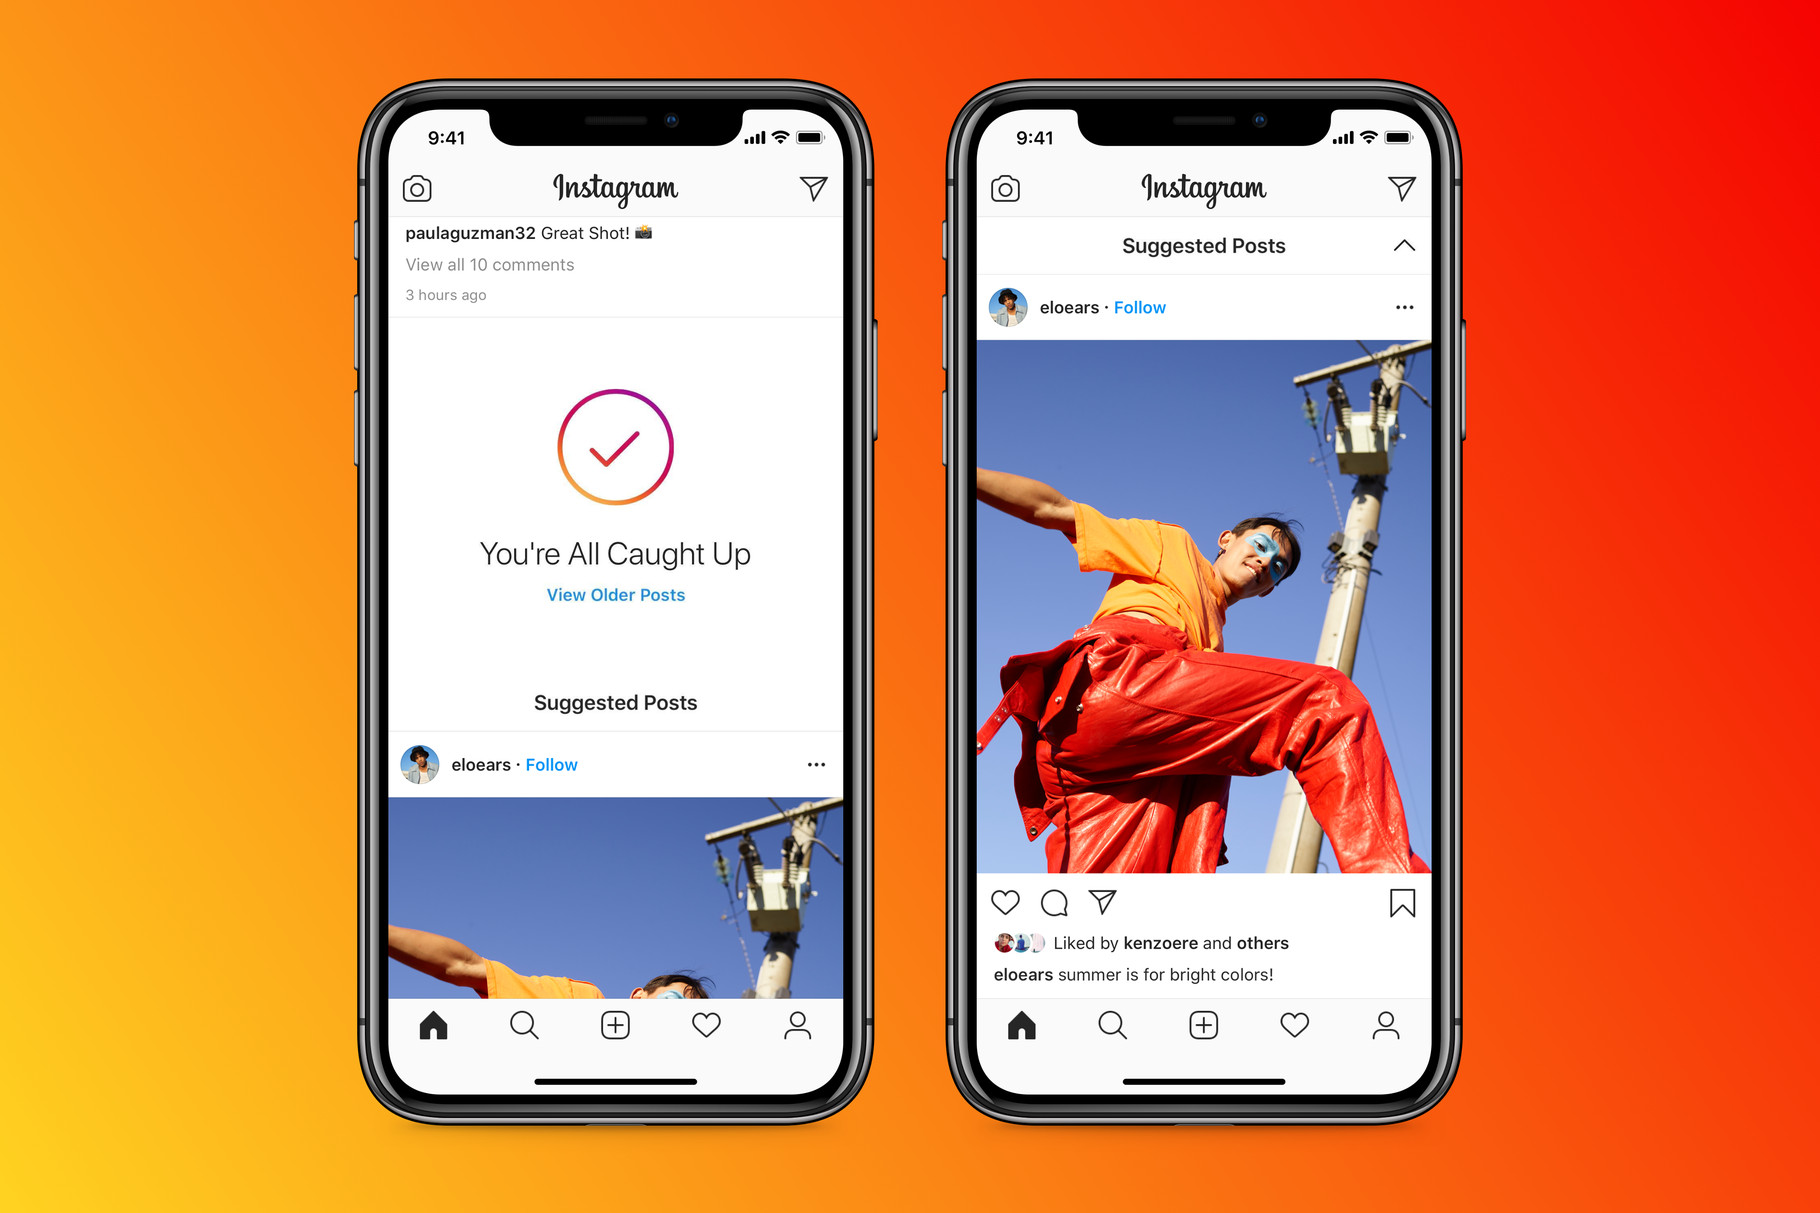 Instagram rolls out suggested posts to keep you glued to your feed